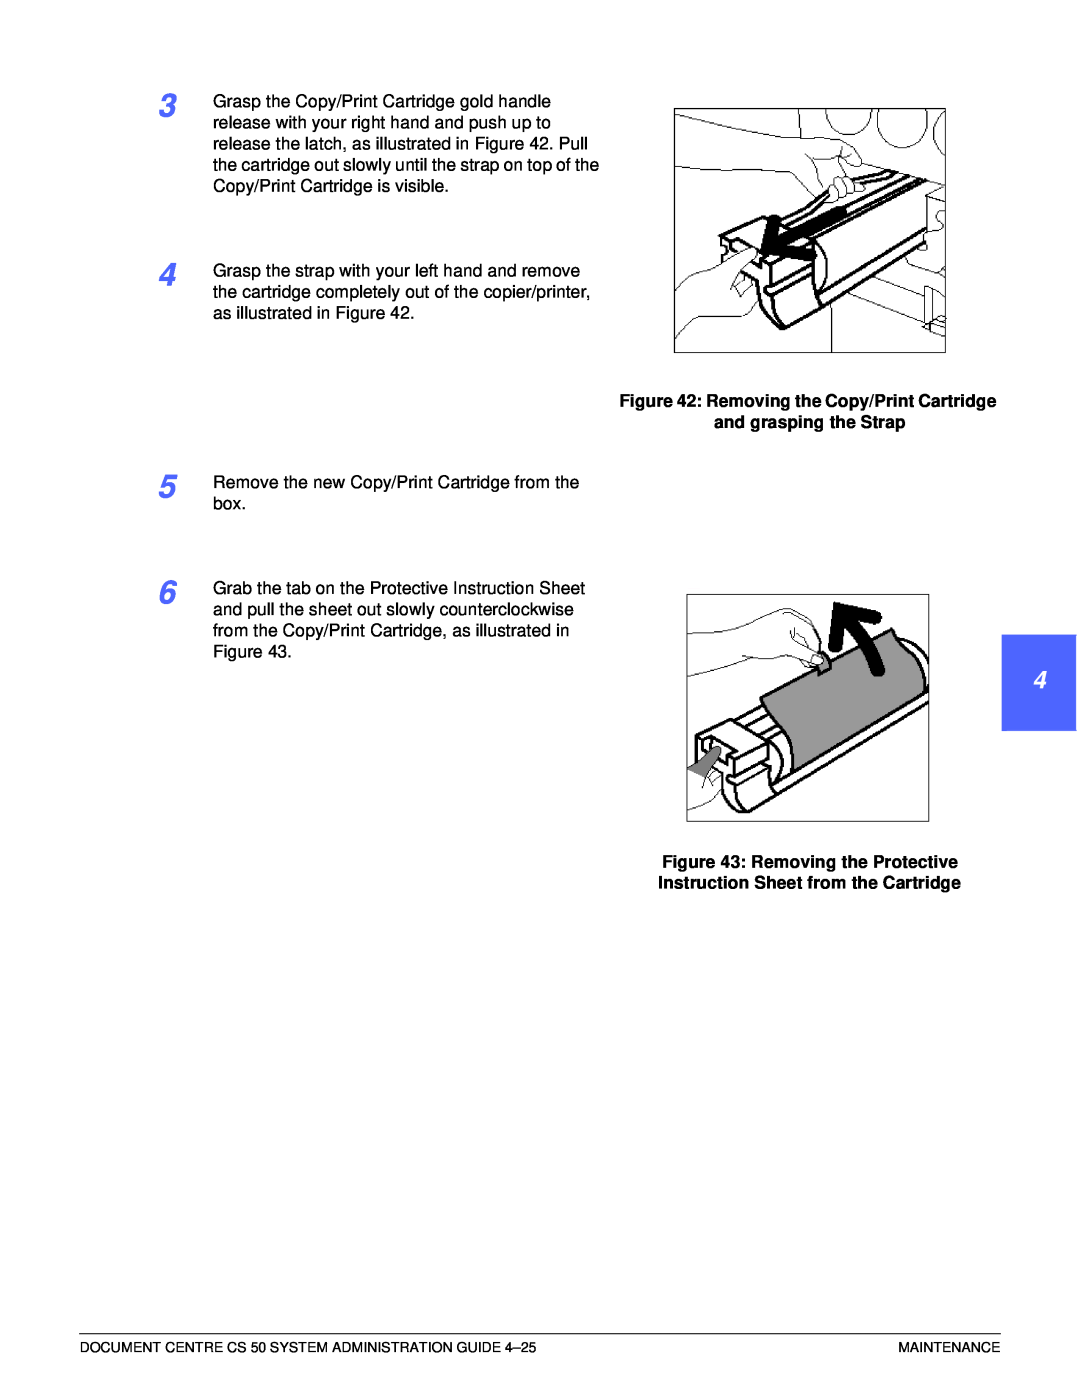 Xerox 50 manual 1 2 44 5 6 7, Removing the Copy/Print Cartridge, and grasping the Strap, Removing the Protective 